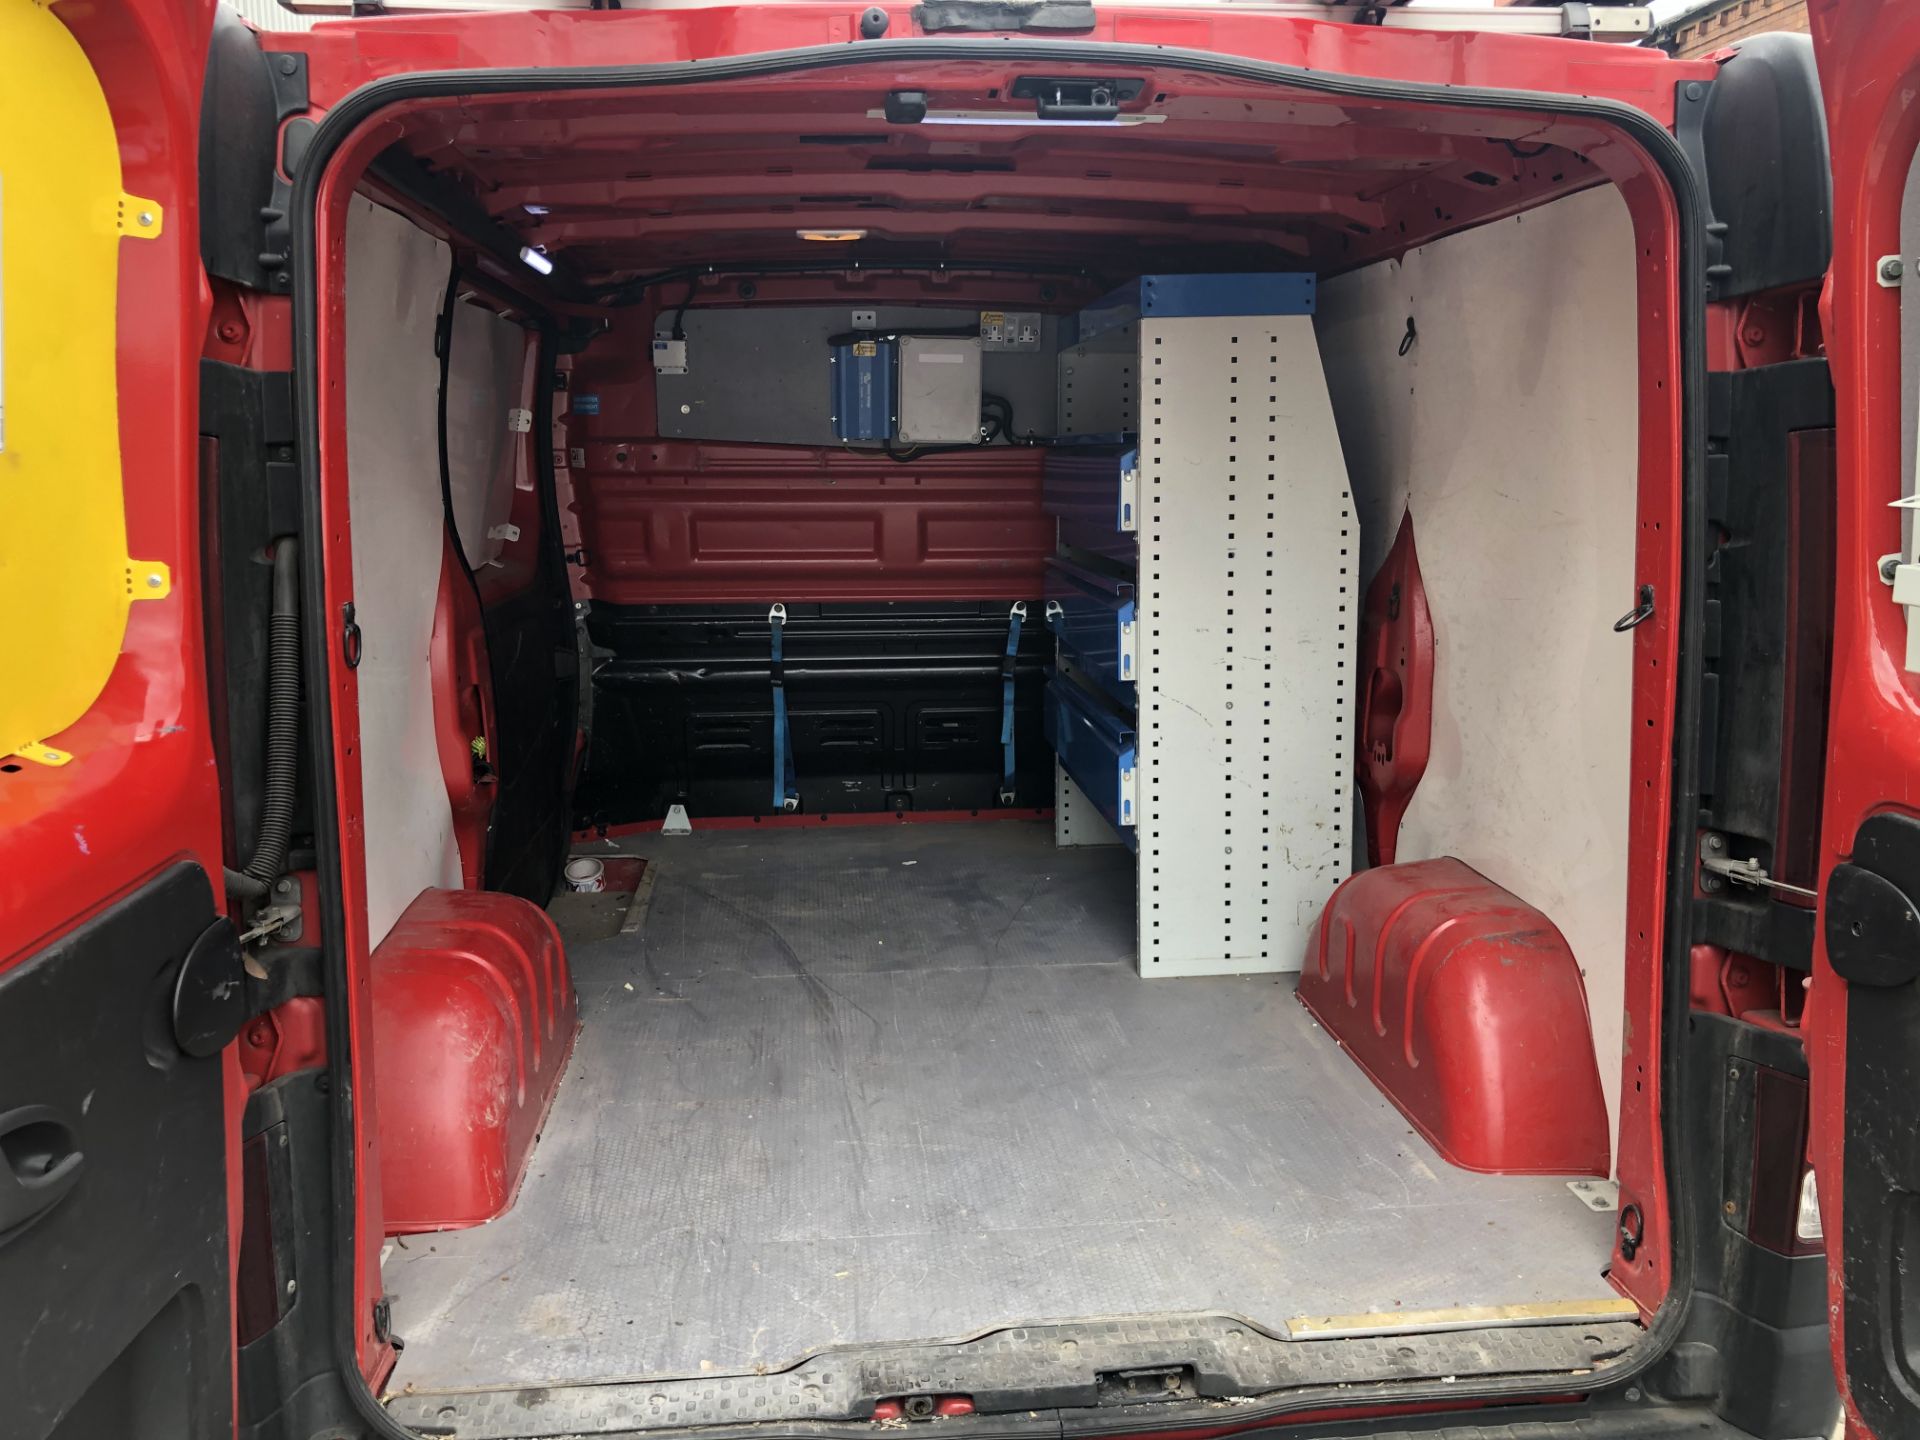 VAUXHALL VIVARO L1, 2700 1.6CDTI 90PS ecoFLEX H1 Panel Van, fitted with 2 Van Guard Roof Boxes & - Image 8 of 11